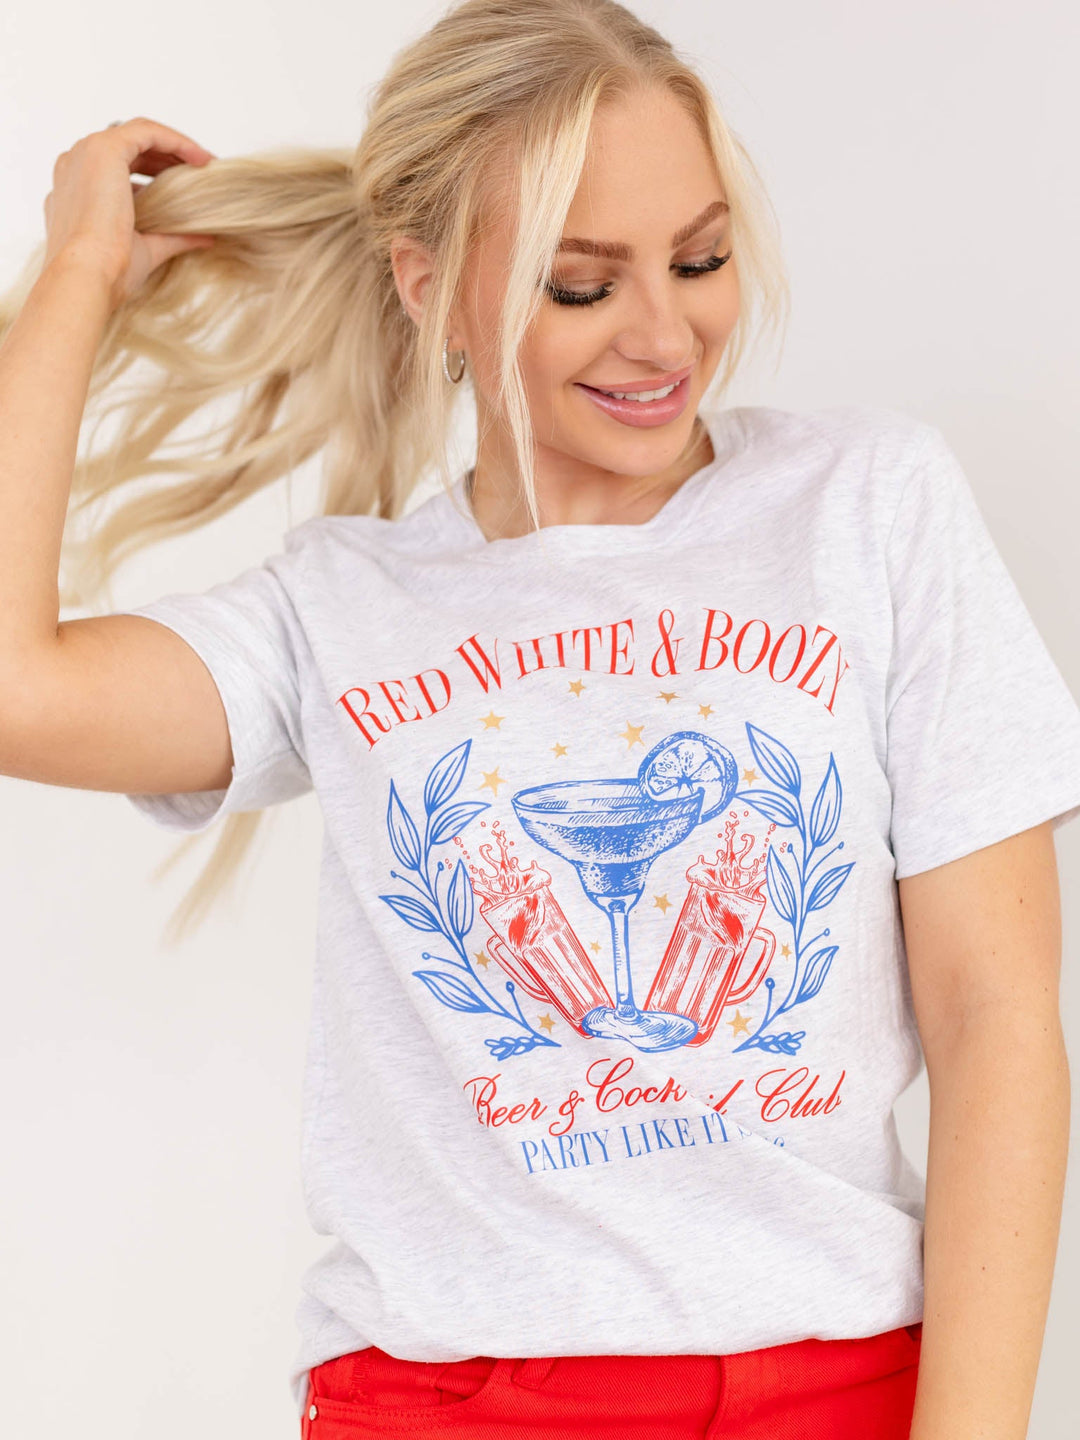 Red White & Boozy Graphic TeeScreen tees